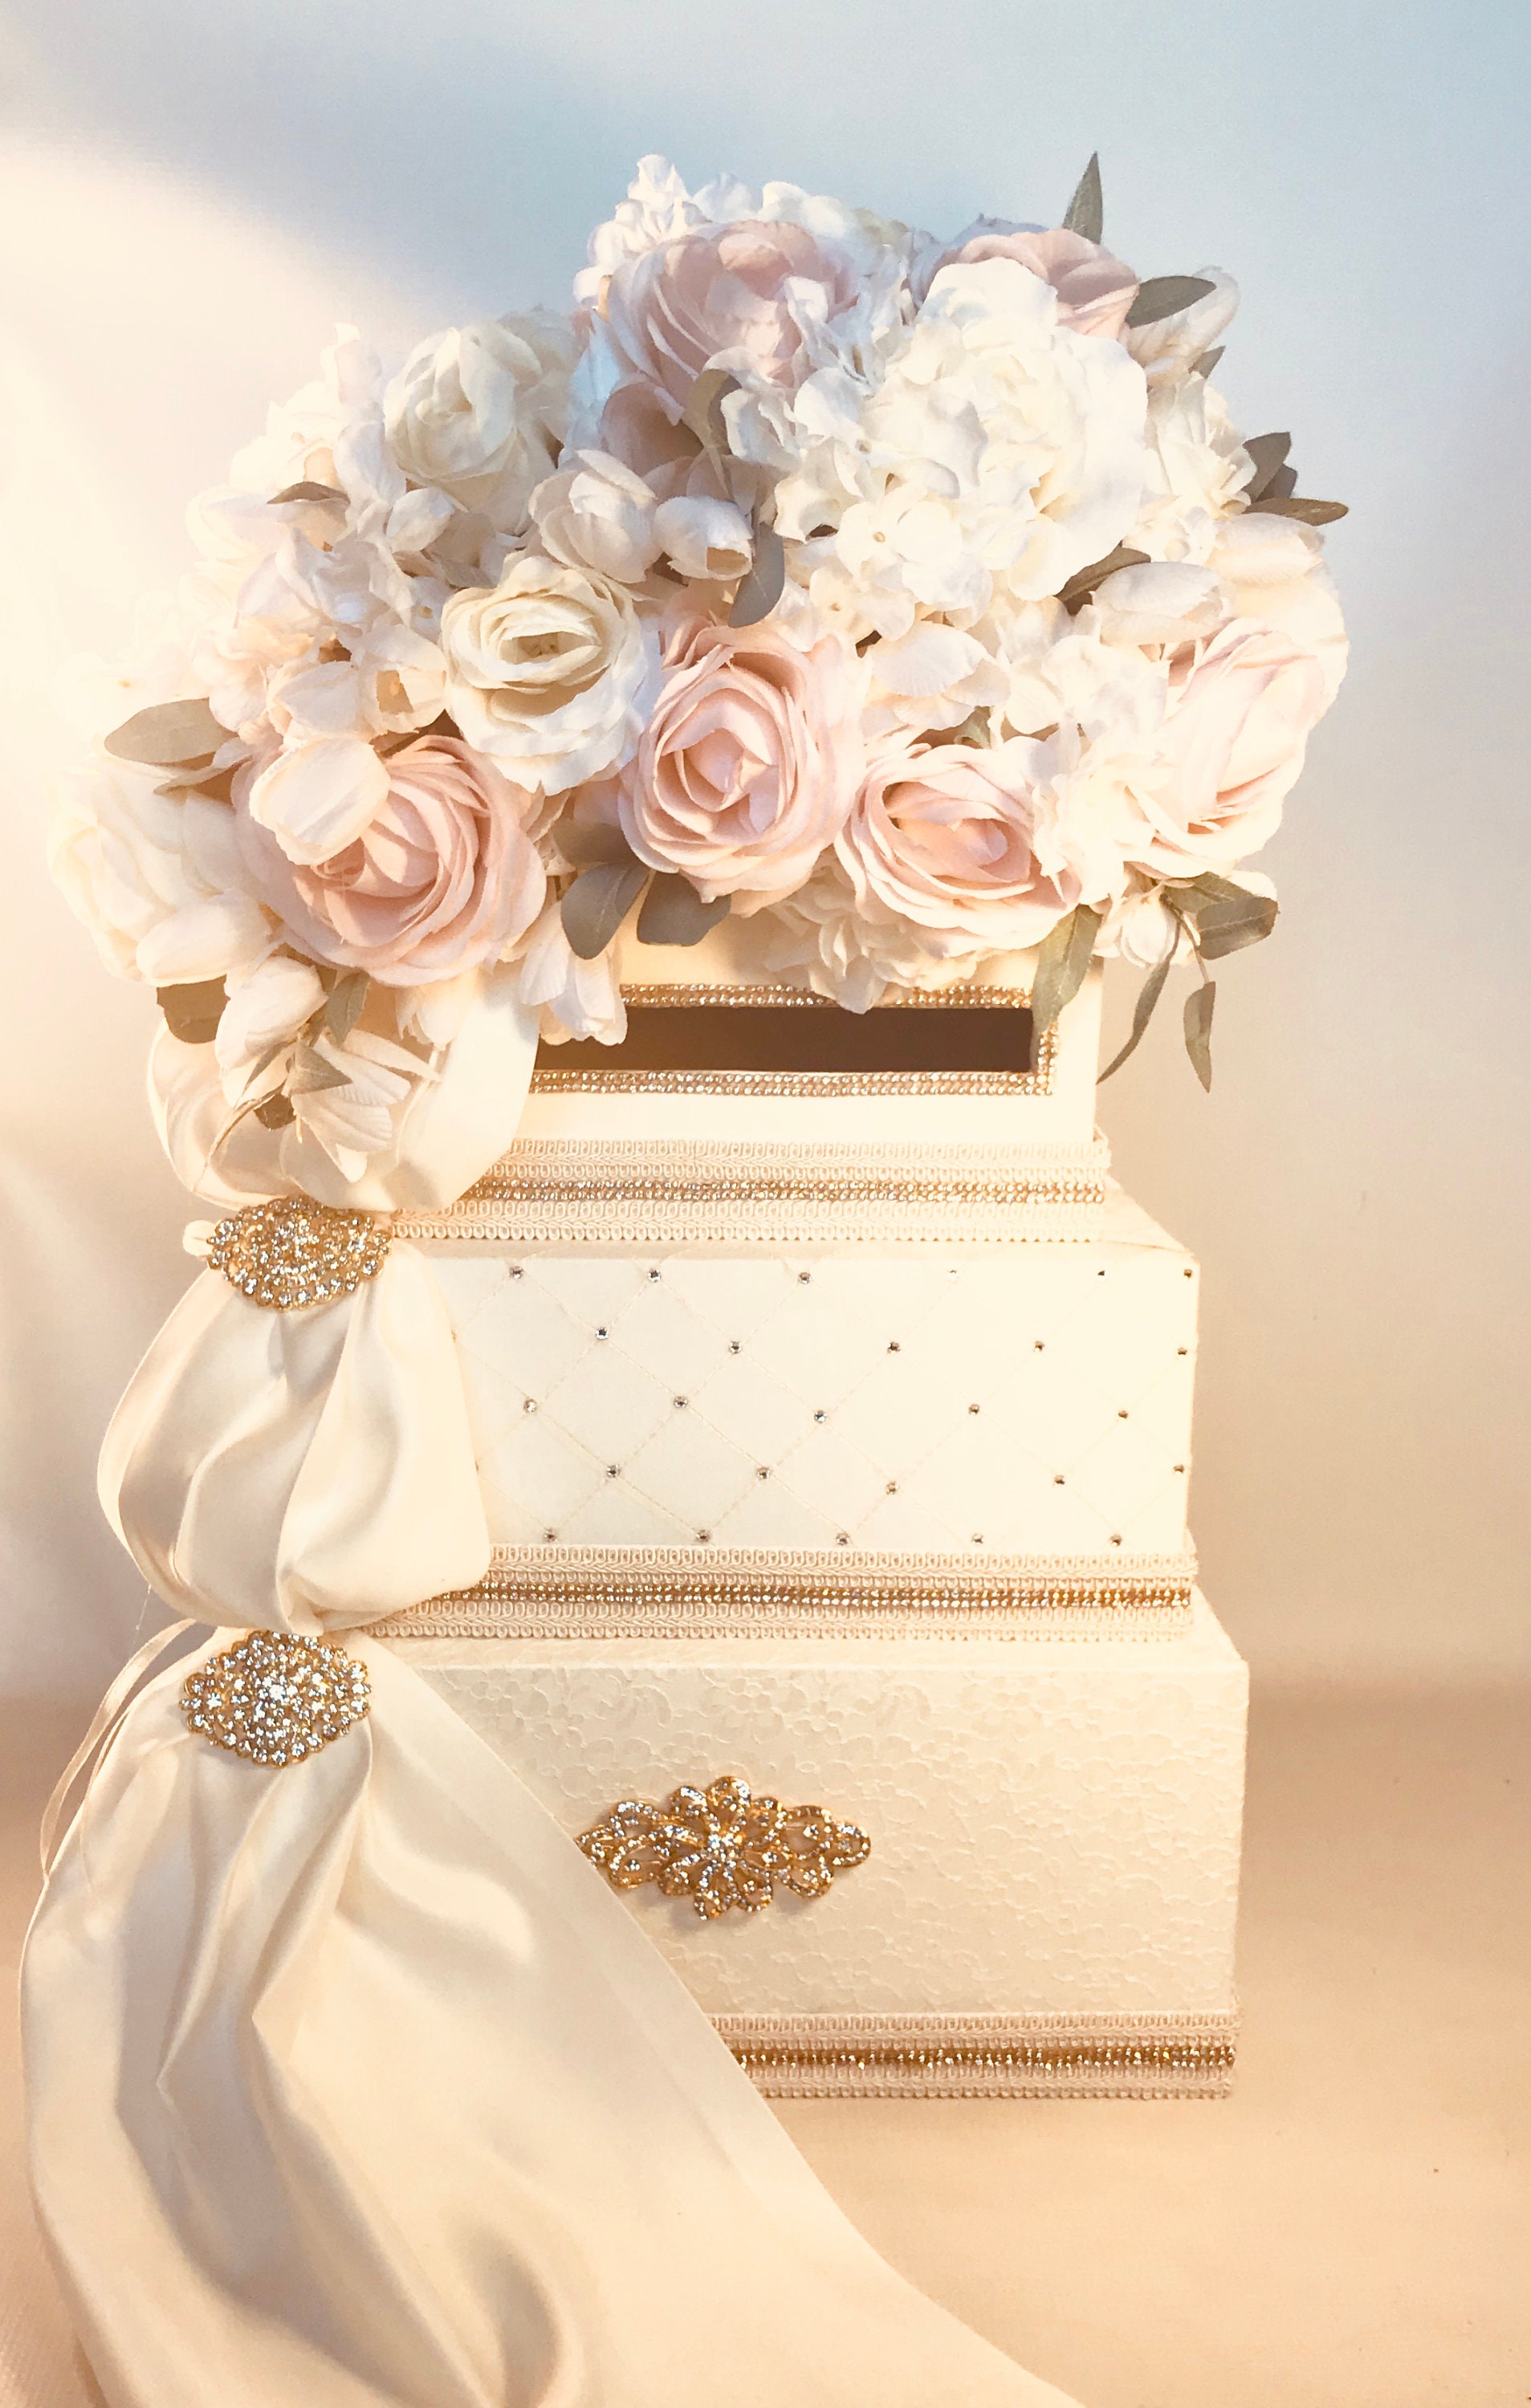 White Wedding Card Box, 3 tiers, All The Best Card Boxes